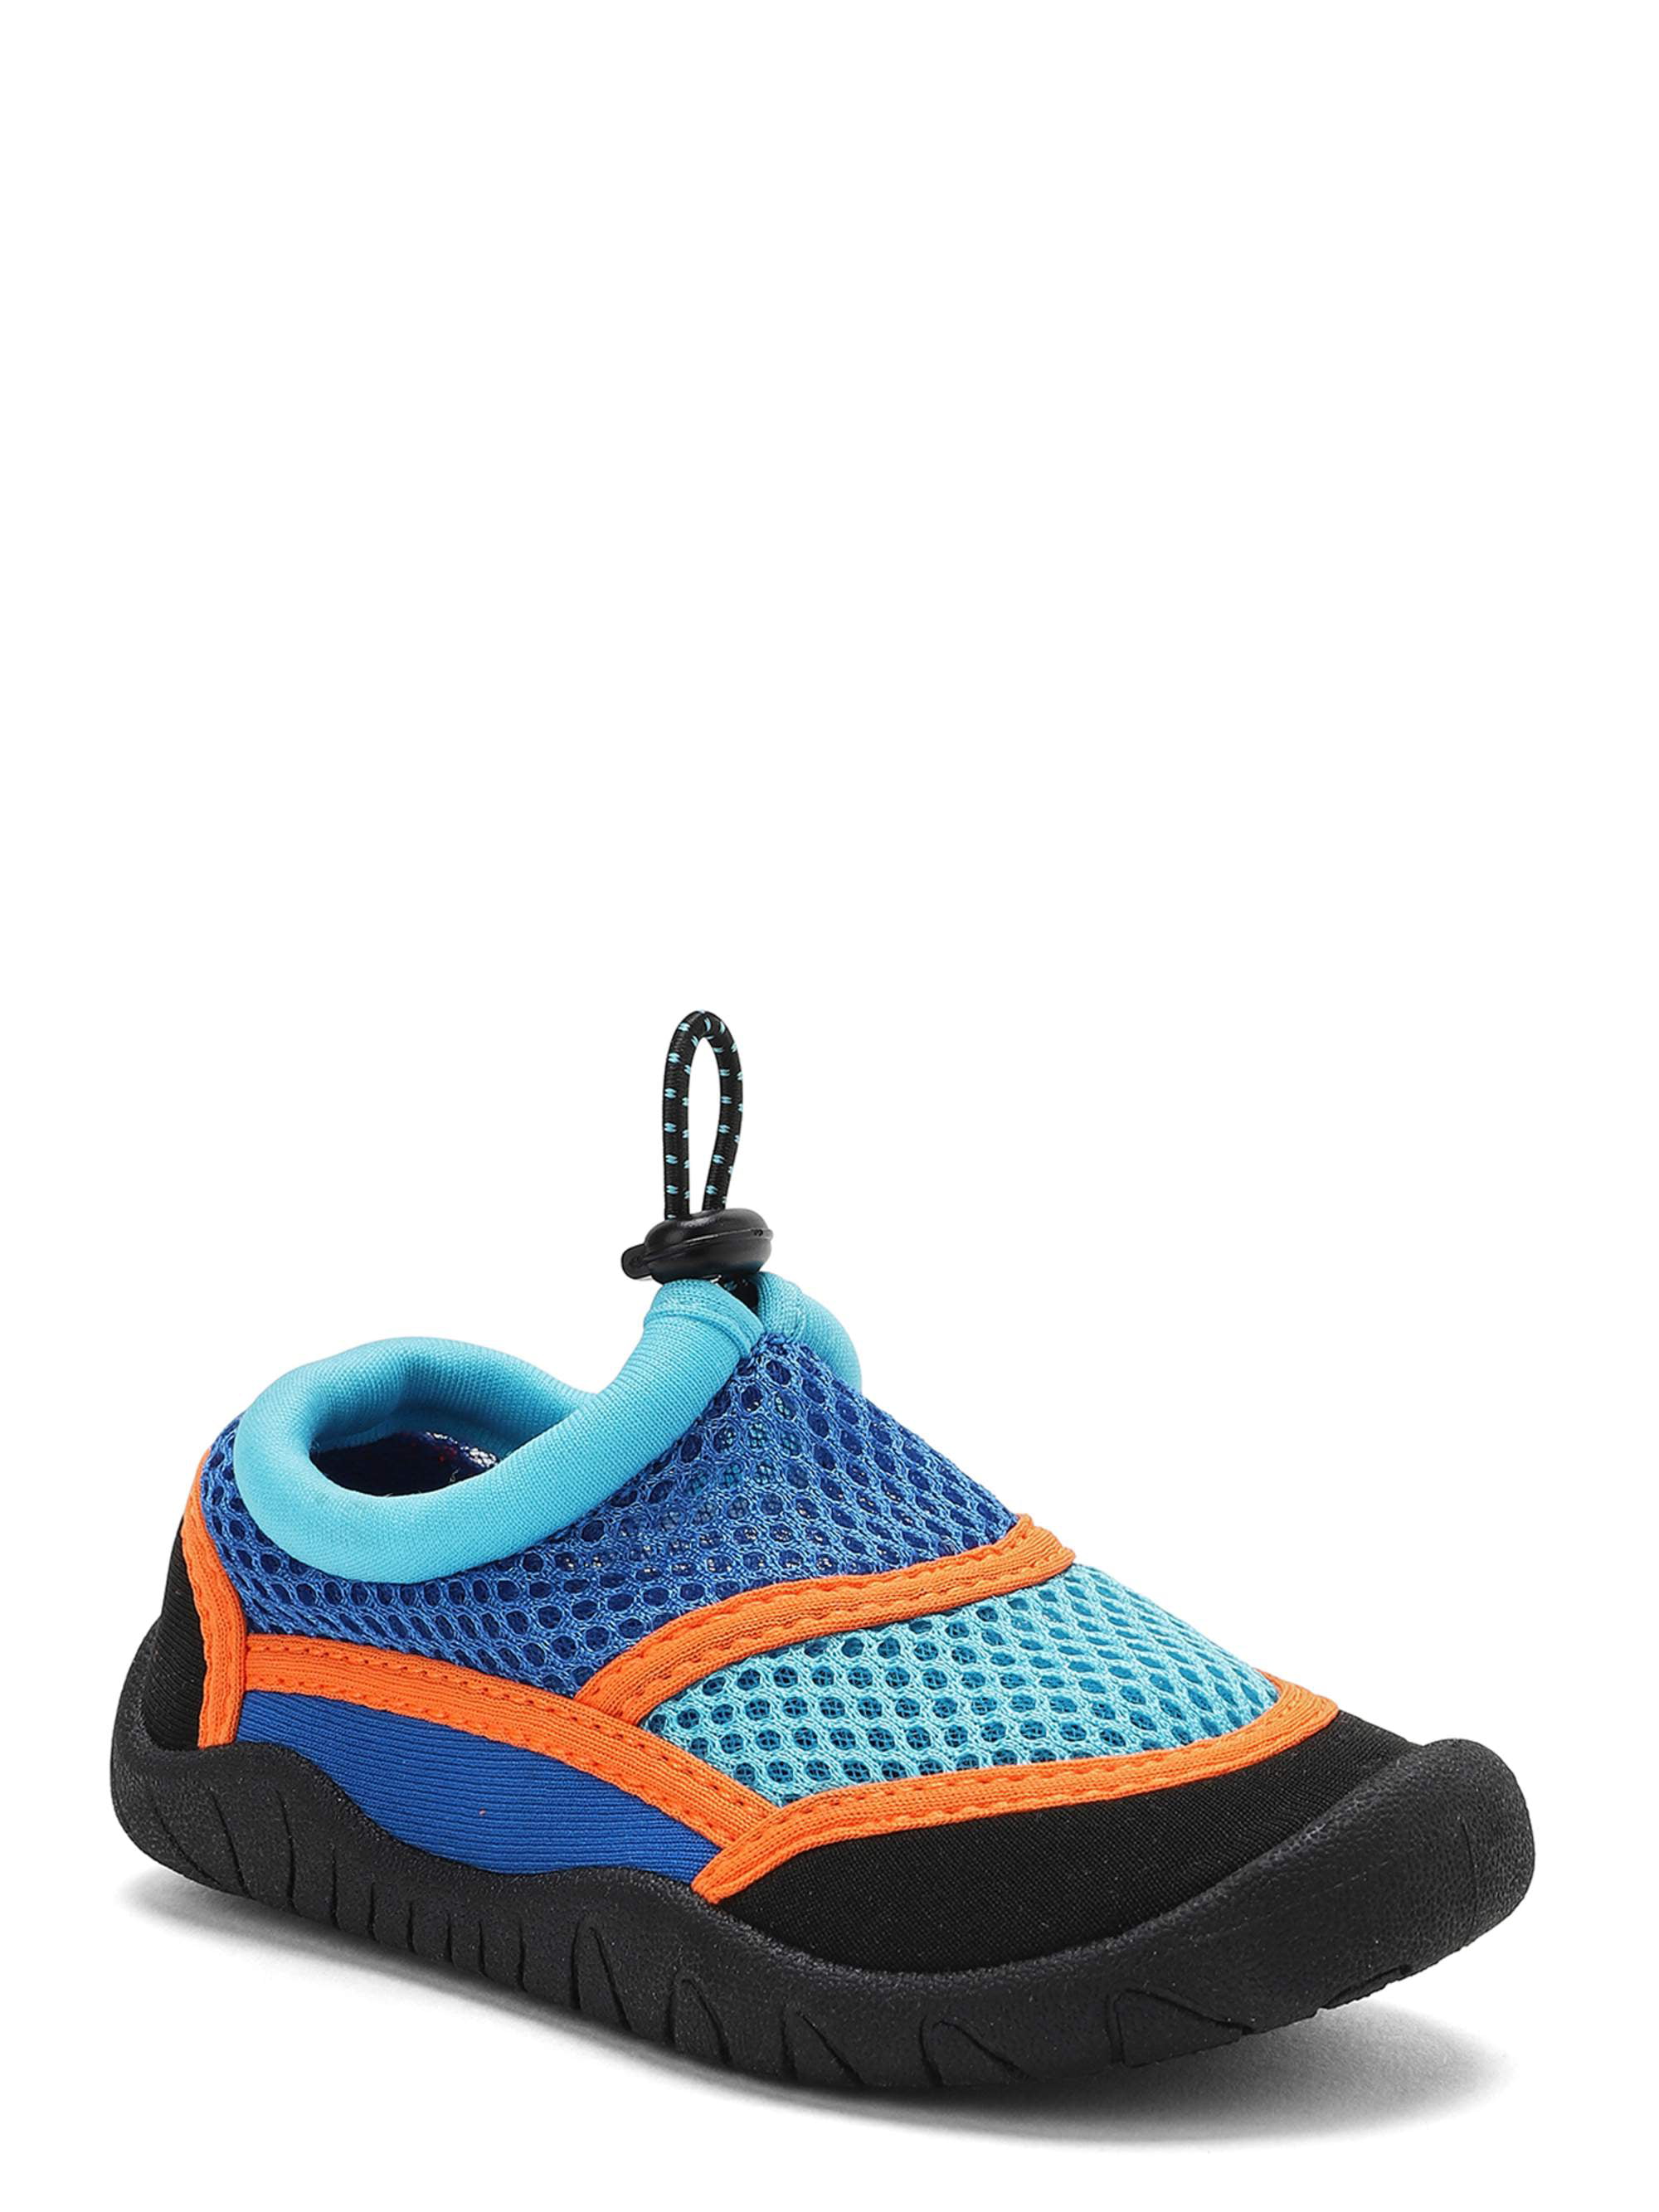 AQUASHOES Footwear For Water children size 13 or adult size 8 